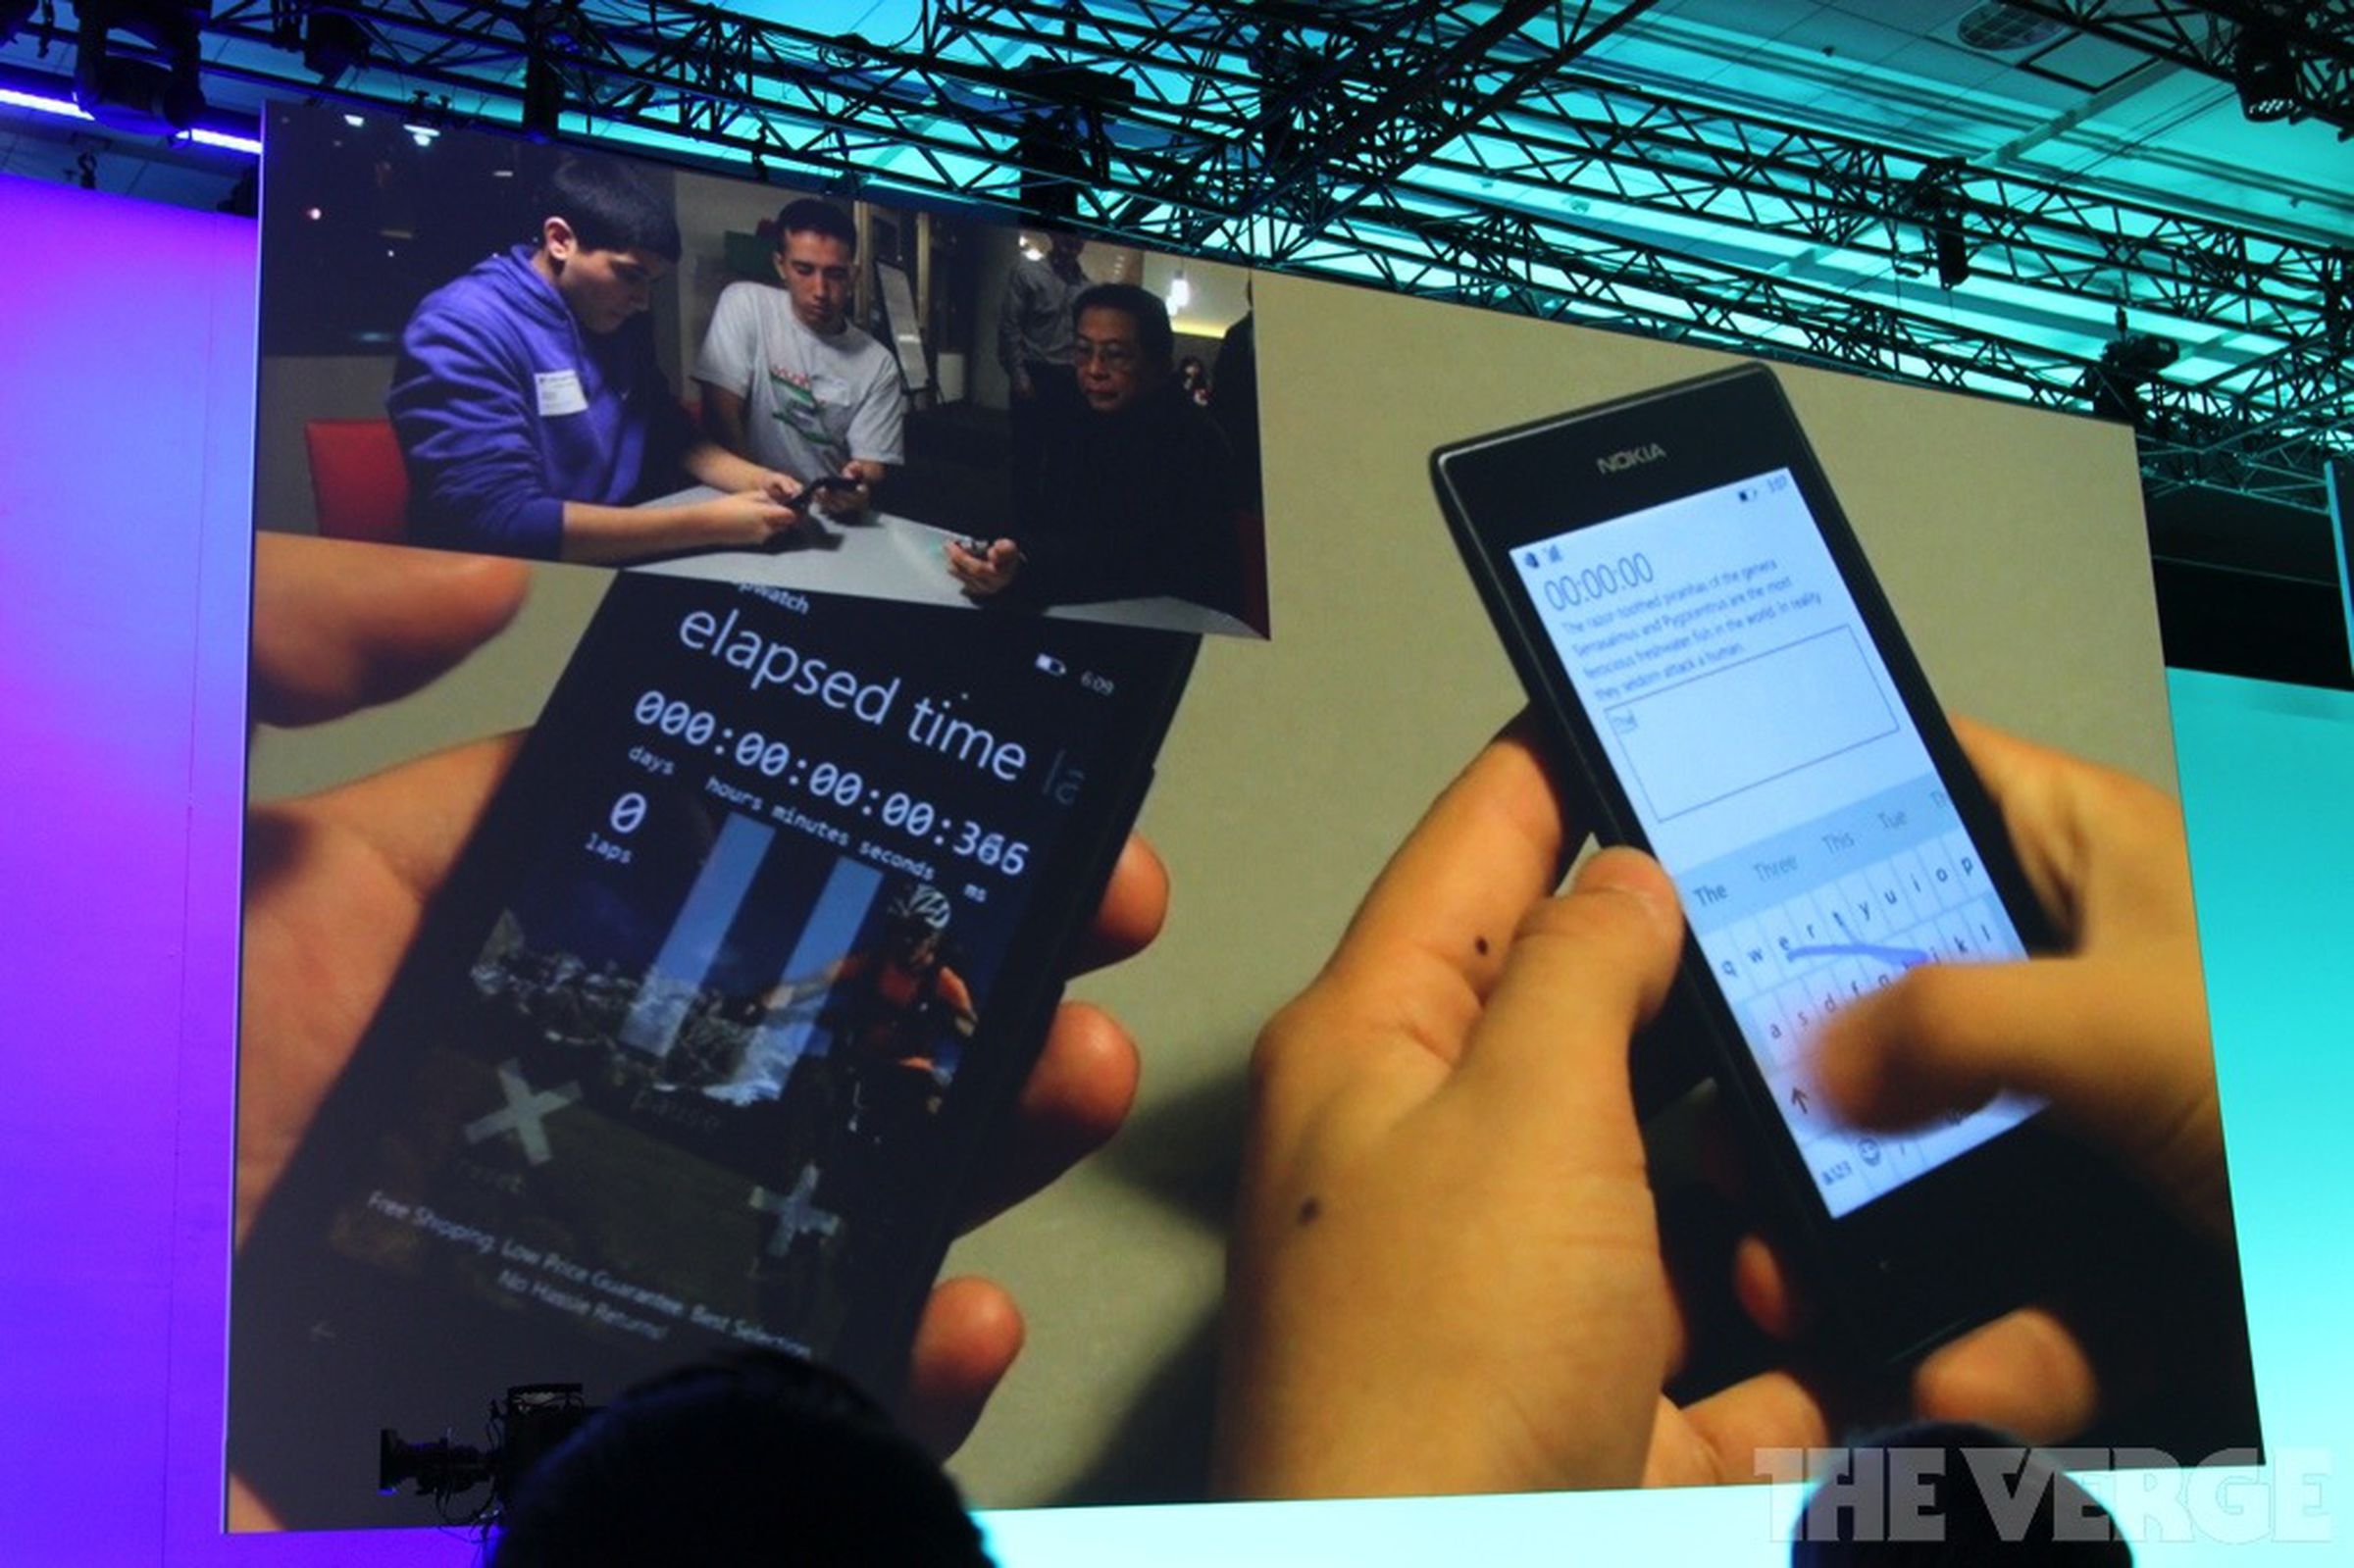 Photos of Windows Phone 8.1 with Cortana voice assistant from Microsoft Build